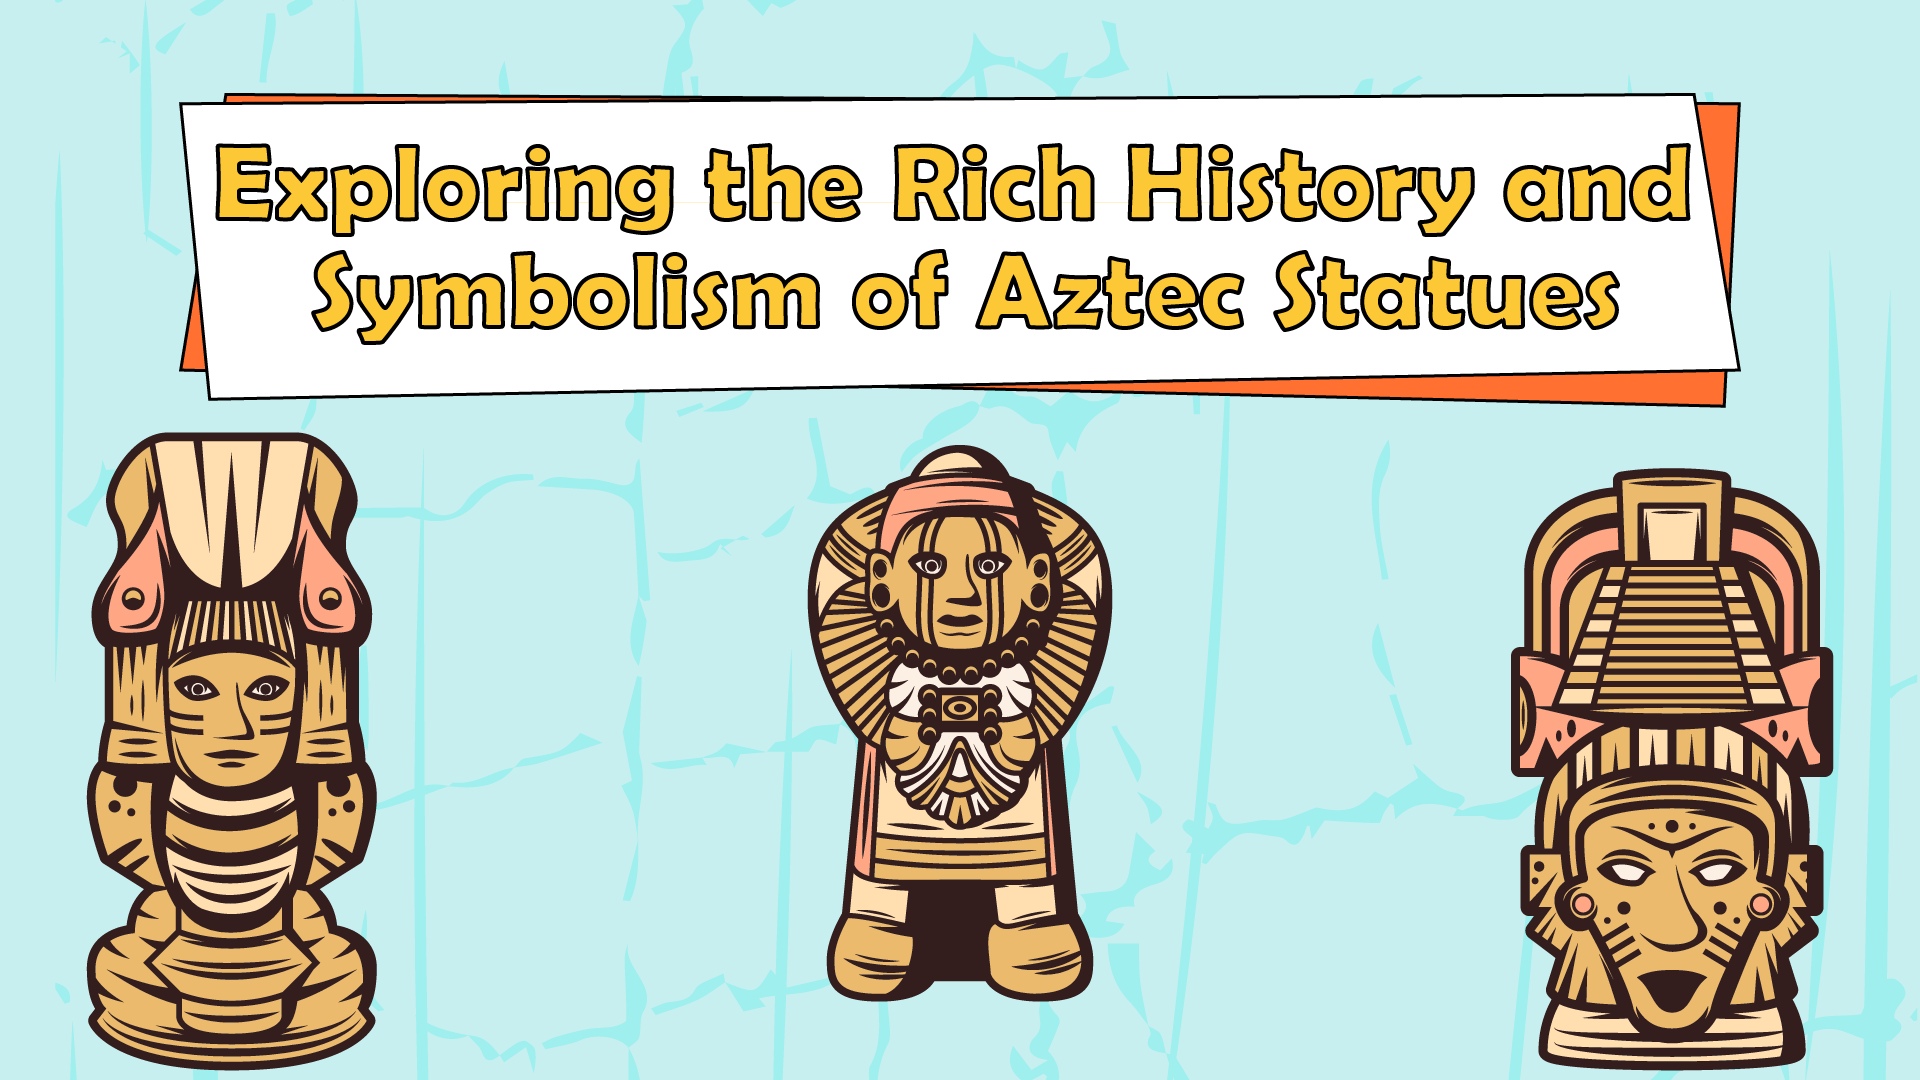 Exploring the Rich History and Symbolism of Aztec Statues